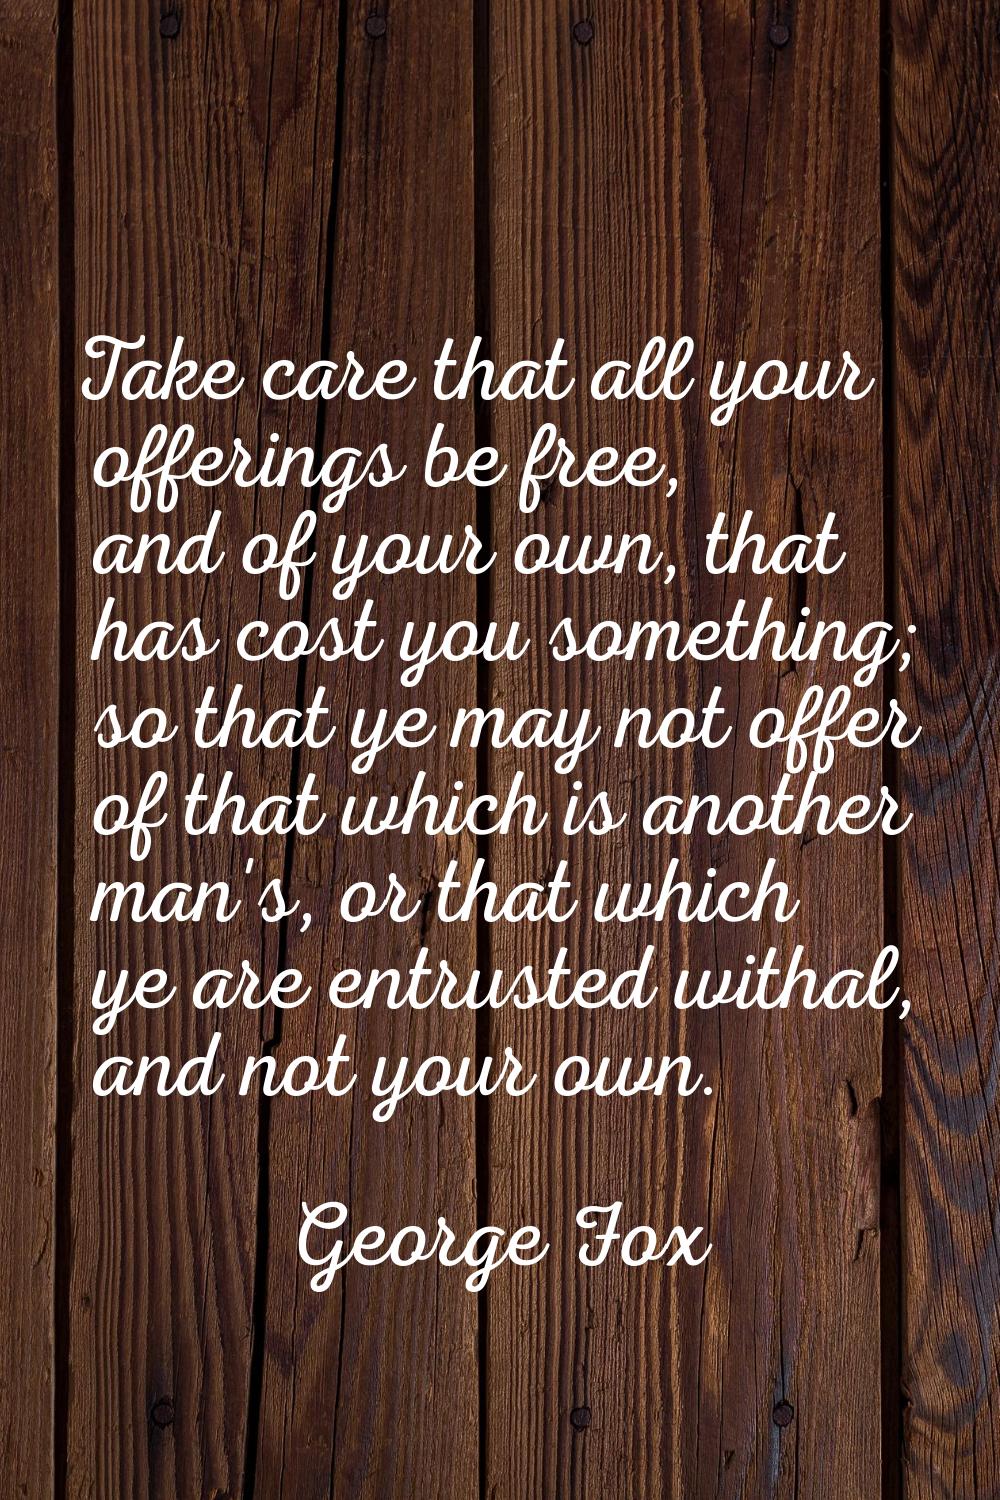 Take care that all your offerings be free, and of your own, that has cost you something; so that ye